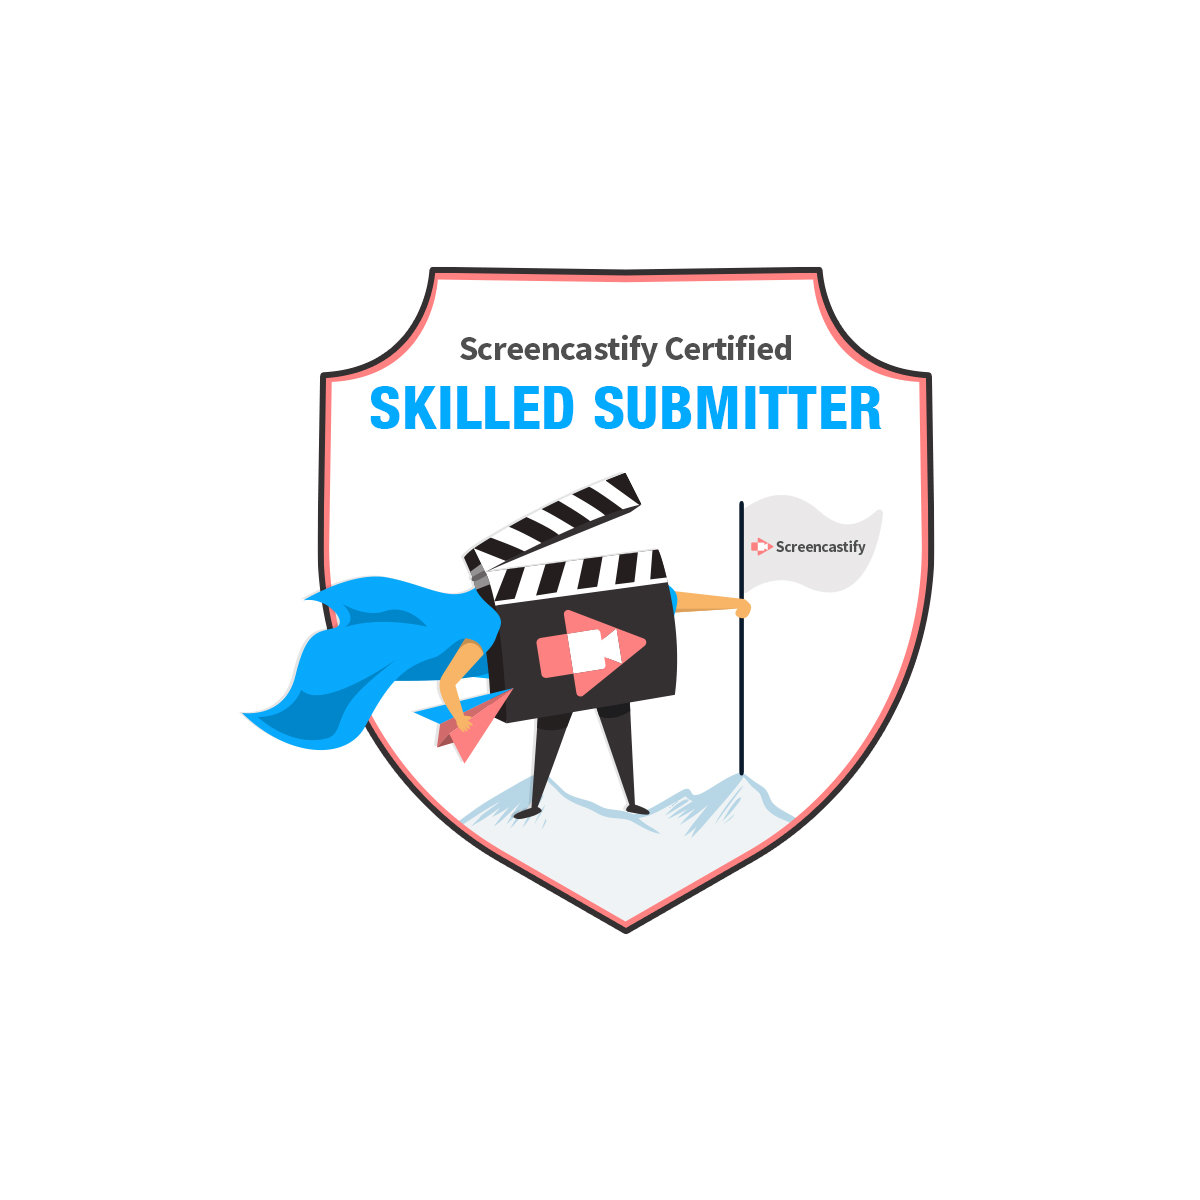 Screencastify Skilled Submitter